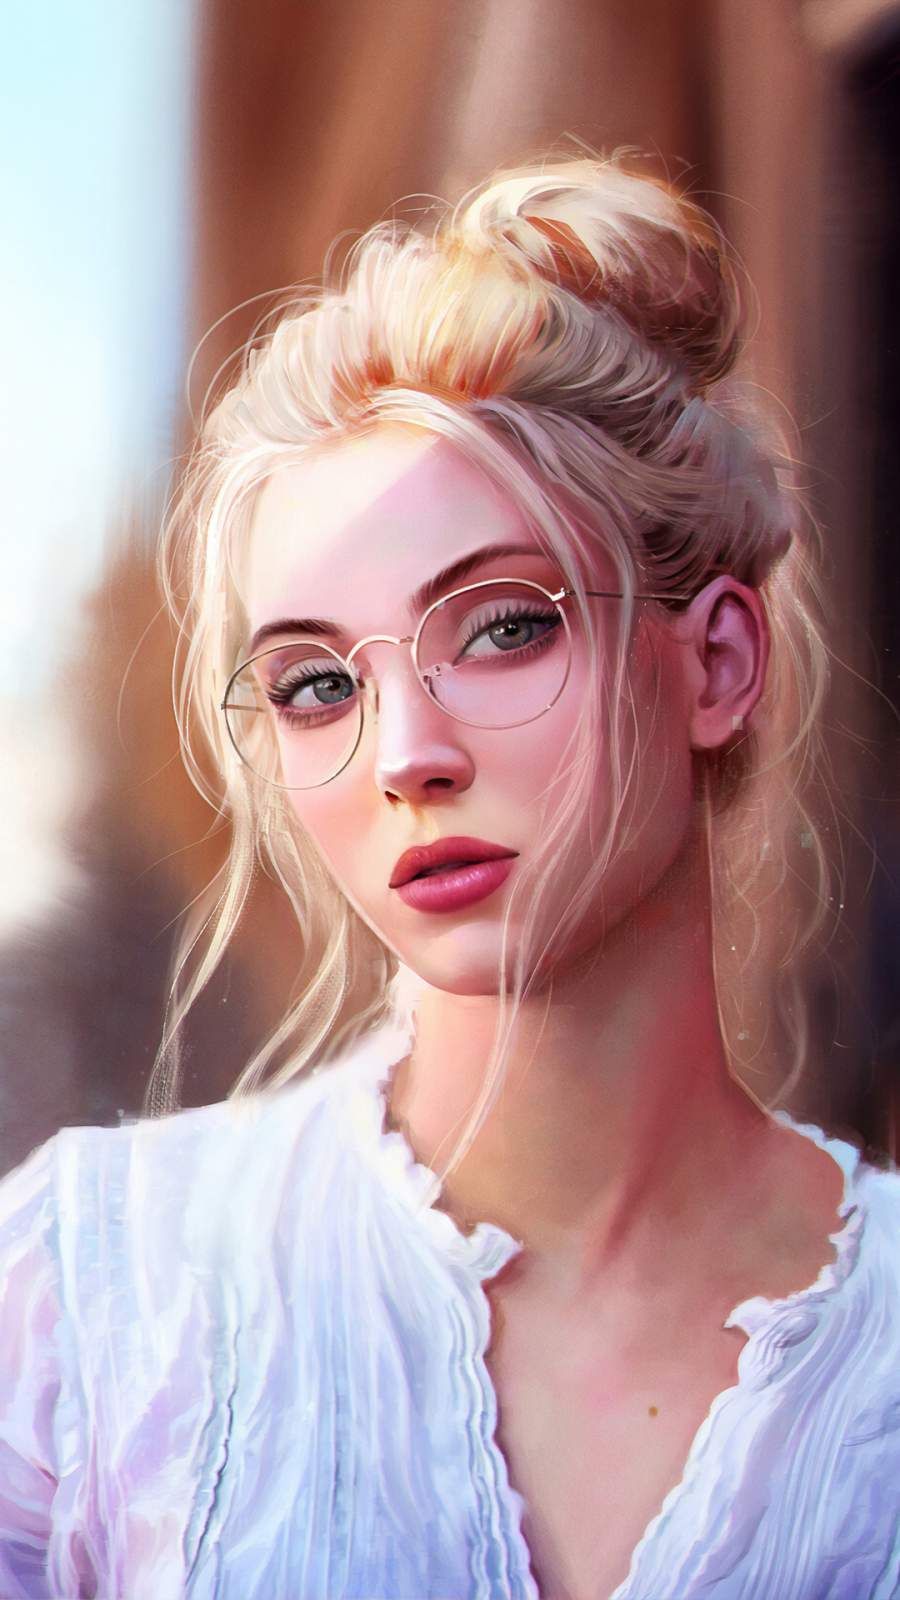 Girl with Glasses Artistic Portrait iPhone Wallpaper. Girls with glasses, Blonde girl, Portrait girl